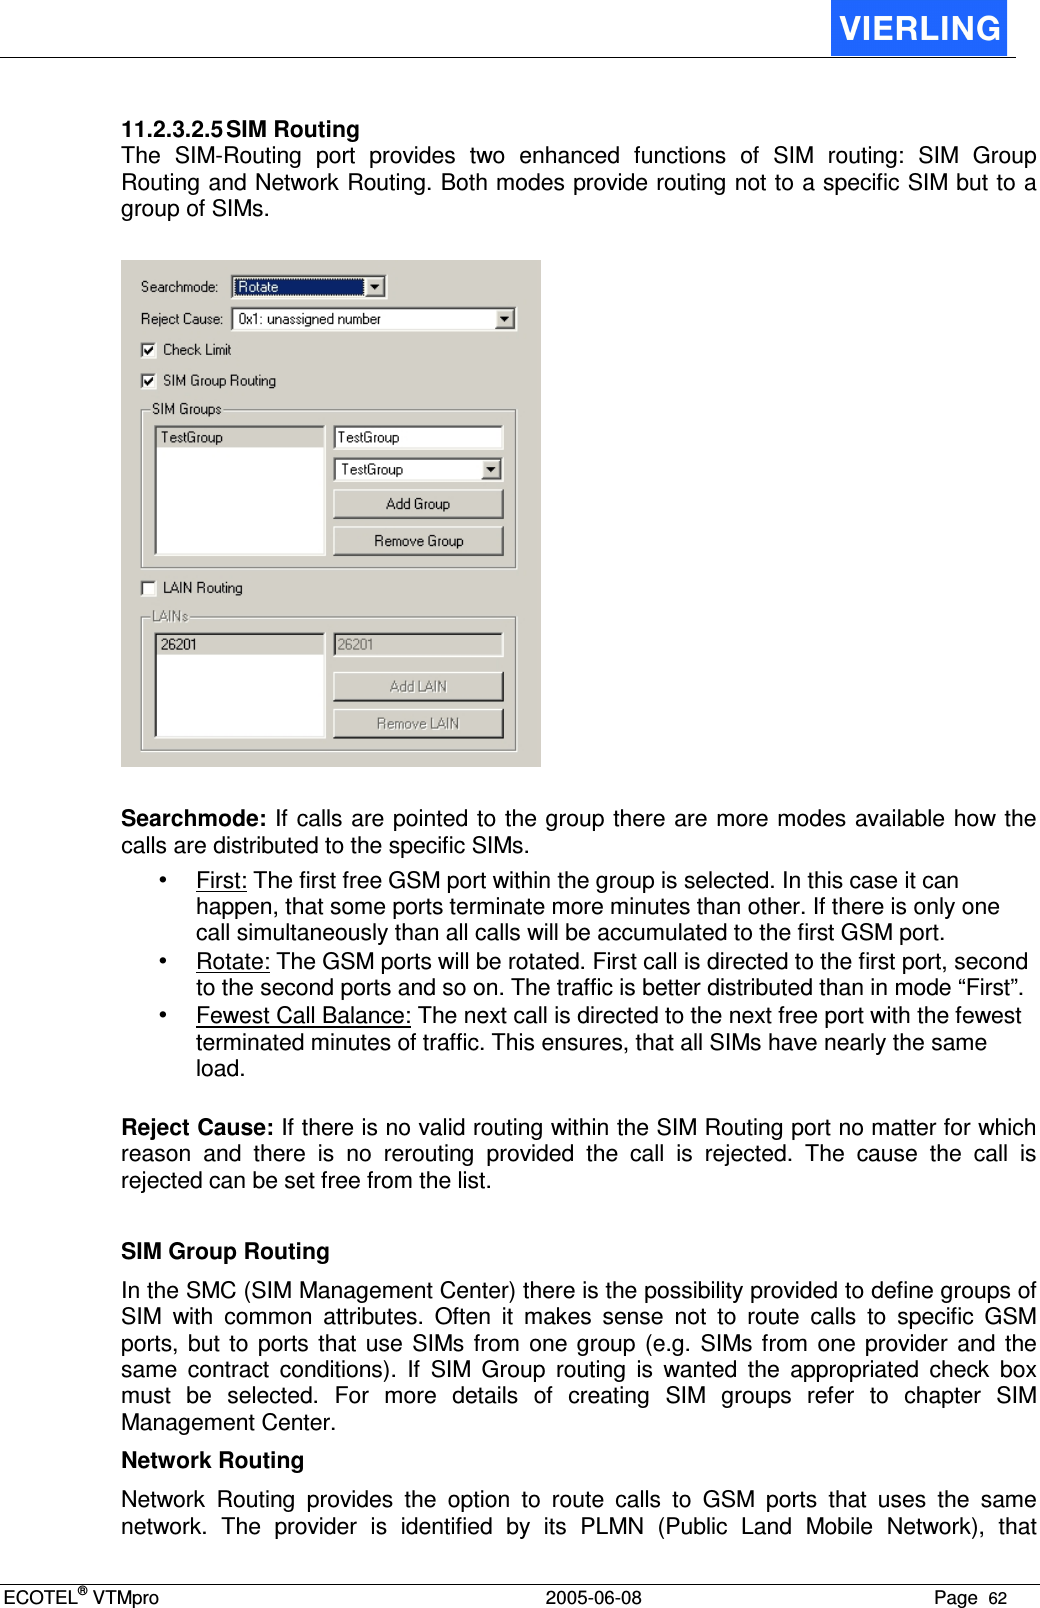 ECOTEL® VTMpro  2005-06-08 Page  62    11.2.3.2.5 SIM Routing The  SIM-Routing  port  provides  two  enhanced  functions  of  SIM  routing:  SIM  Group Routing and Network Routing. Both modes provide routing not to a specific SIM but to a group of SIMs.    Searchmode: If calls are pointed to the group there are more modes available how the calls are distributed to the specific SIMs. • First: The first free GSM port within the group is selected. In this case it can happen, that some ports terminate more minutes than other. If there is only one call simultaneously than all calls will be accumulated to the first GSM port. • Rotate: The GSM ports will be rotated. First call is directed to the first port, second to the second ports and so on. The traffic is better distributed than in mode “First”. • Fewest Call Balance: The next call is directed to the next free port with the fewest terminated minutes of traffic. This ensures, that all SIMs have nearly the same load.  Reject Cause: If there is no valid routing within the SIM Routing port no matter for which reason  and  there  is  no  rerouting  provided  the  call  is  rejected.  The  cause  the  call  is rejected can be set free from the list.  SIM Group Routing In the SMC (SIM Management Center) there is the possibility provided to define groups of SIM  with  common  attributes.  Often  it  makes  sense  not  to  route  calls  to  specific  GSM ports,  but  to  ports  that use  SIMs  from one  group (e.g.  SIMs from  one provider  and the same  contract  conditions).  If  SIM  Group  routing  is  wanted  the  appropriated  check  box must  be  selected.  For  more  details  of  creating  SIM  groups  refer  to  chapter  SIM Management Center. Network Routing Network  Routing  provides  the  option  to  route  calls  to  GSM  ports  that  uses  the  same network.  The  provider  is  identified  by  its  PLMN  (Public  Land  Mobile  Network),  that 